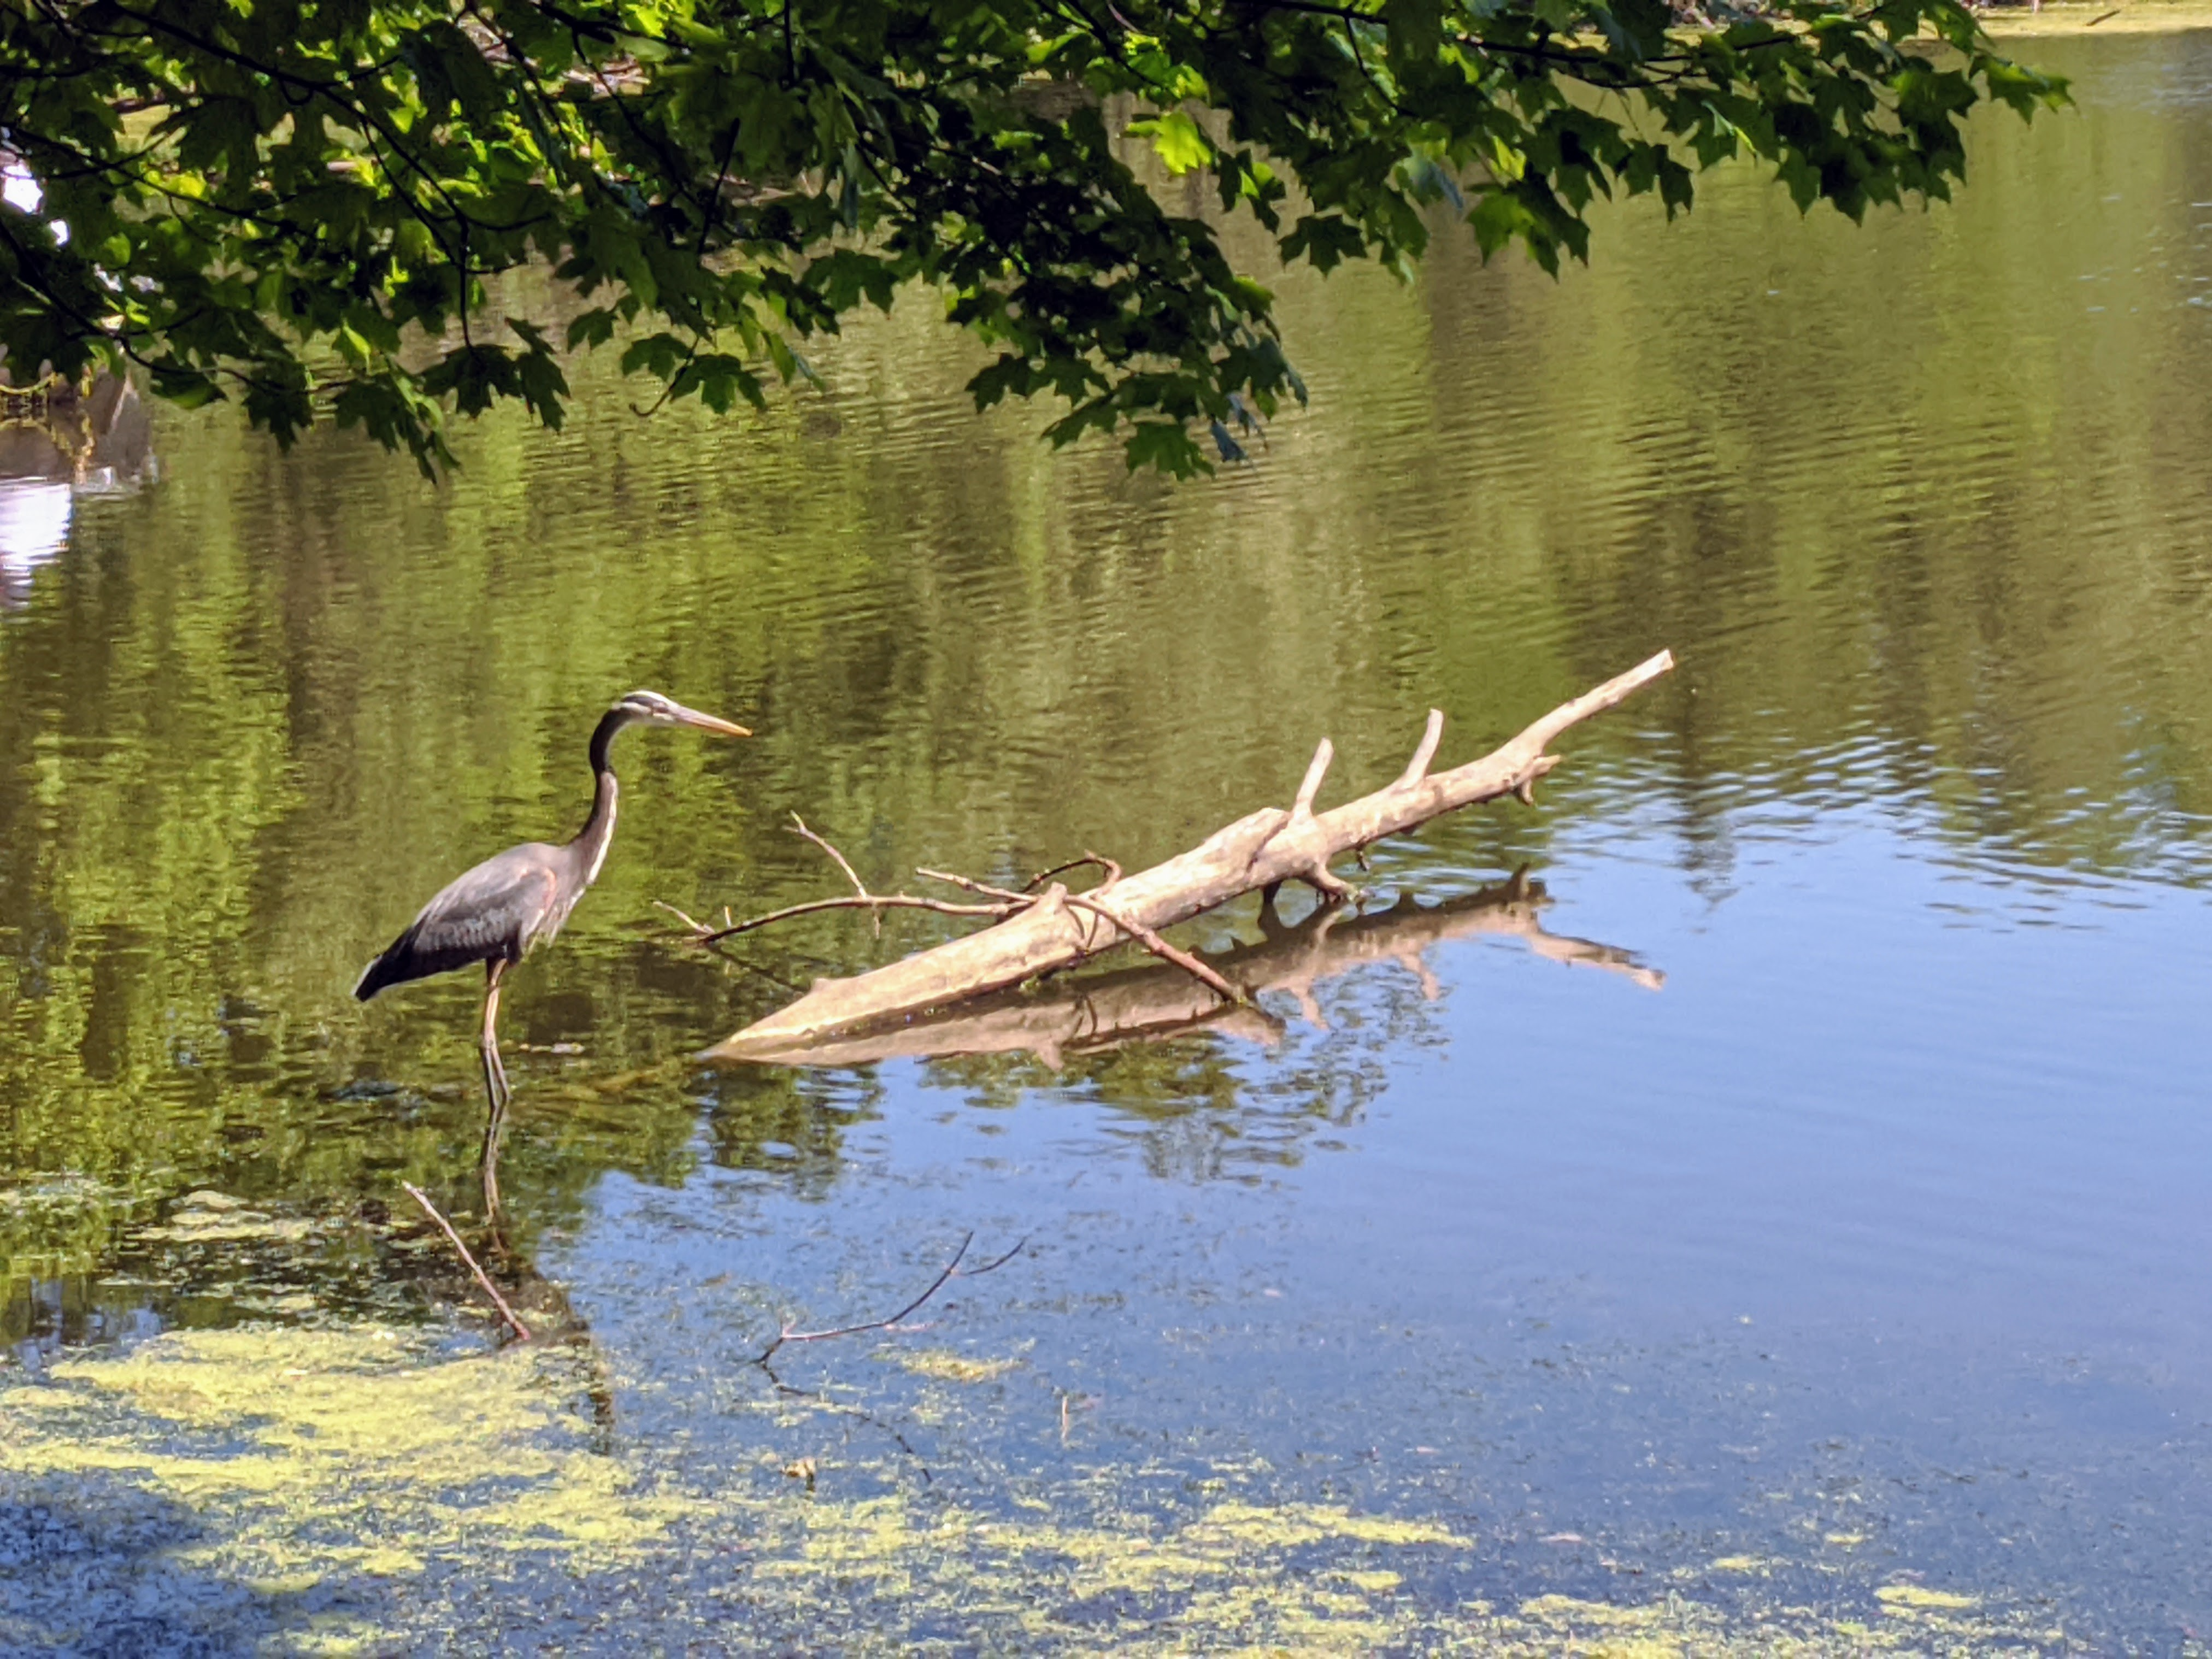 A large wading bird perching on a partially submerged log